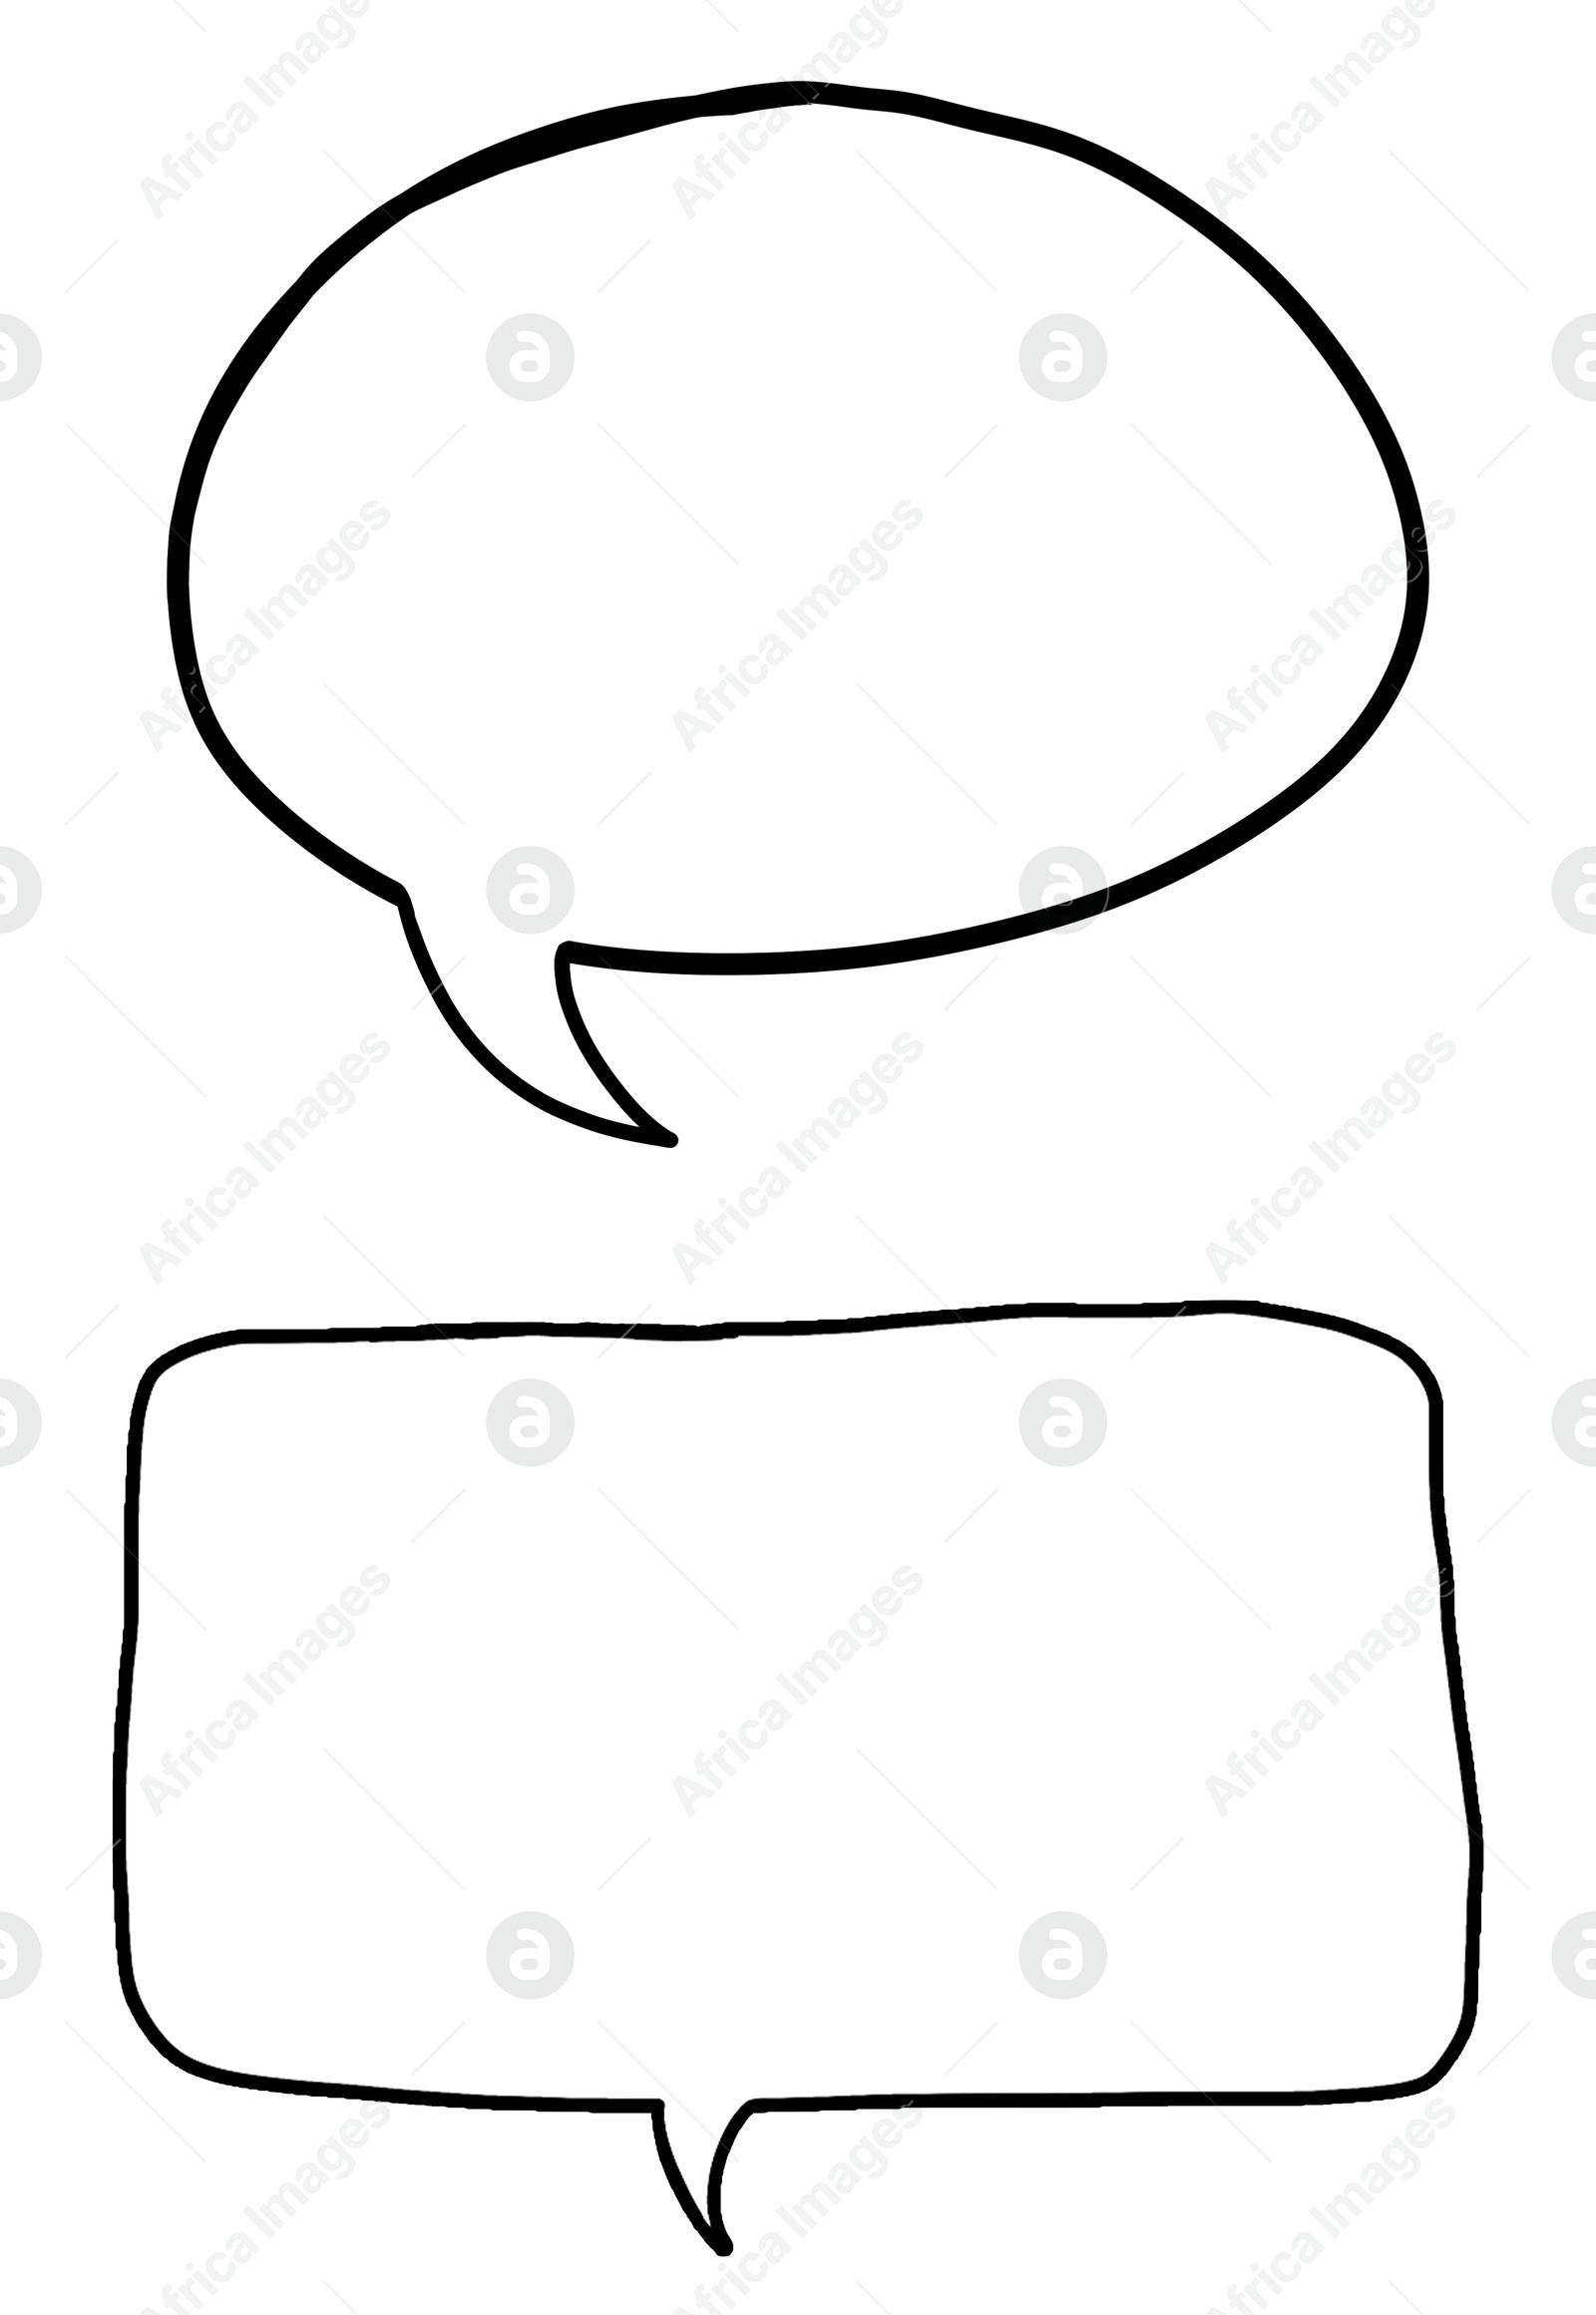 Image of Two different speech bubbles isolated on white, illustration